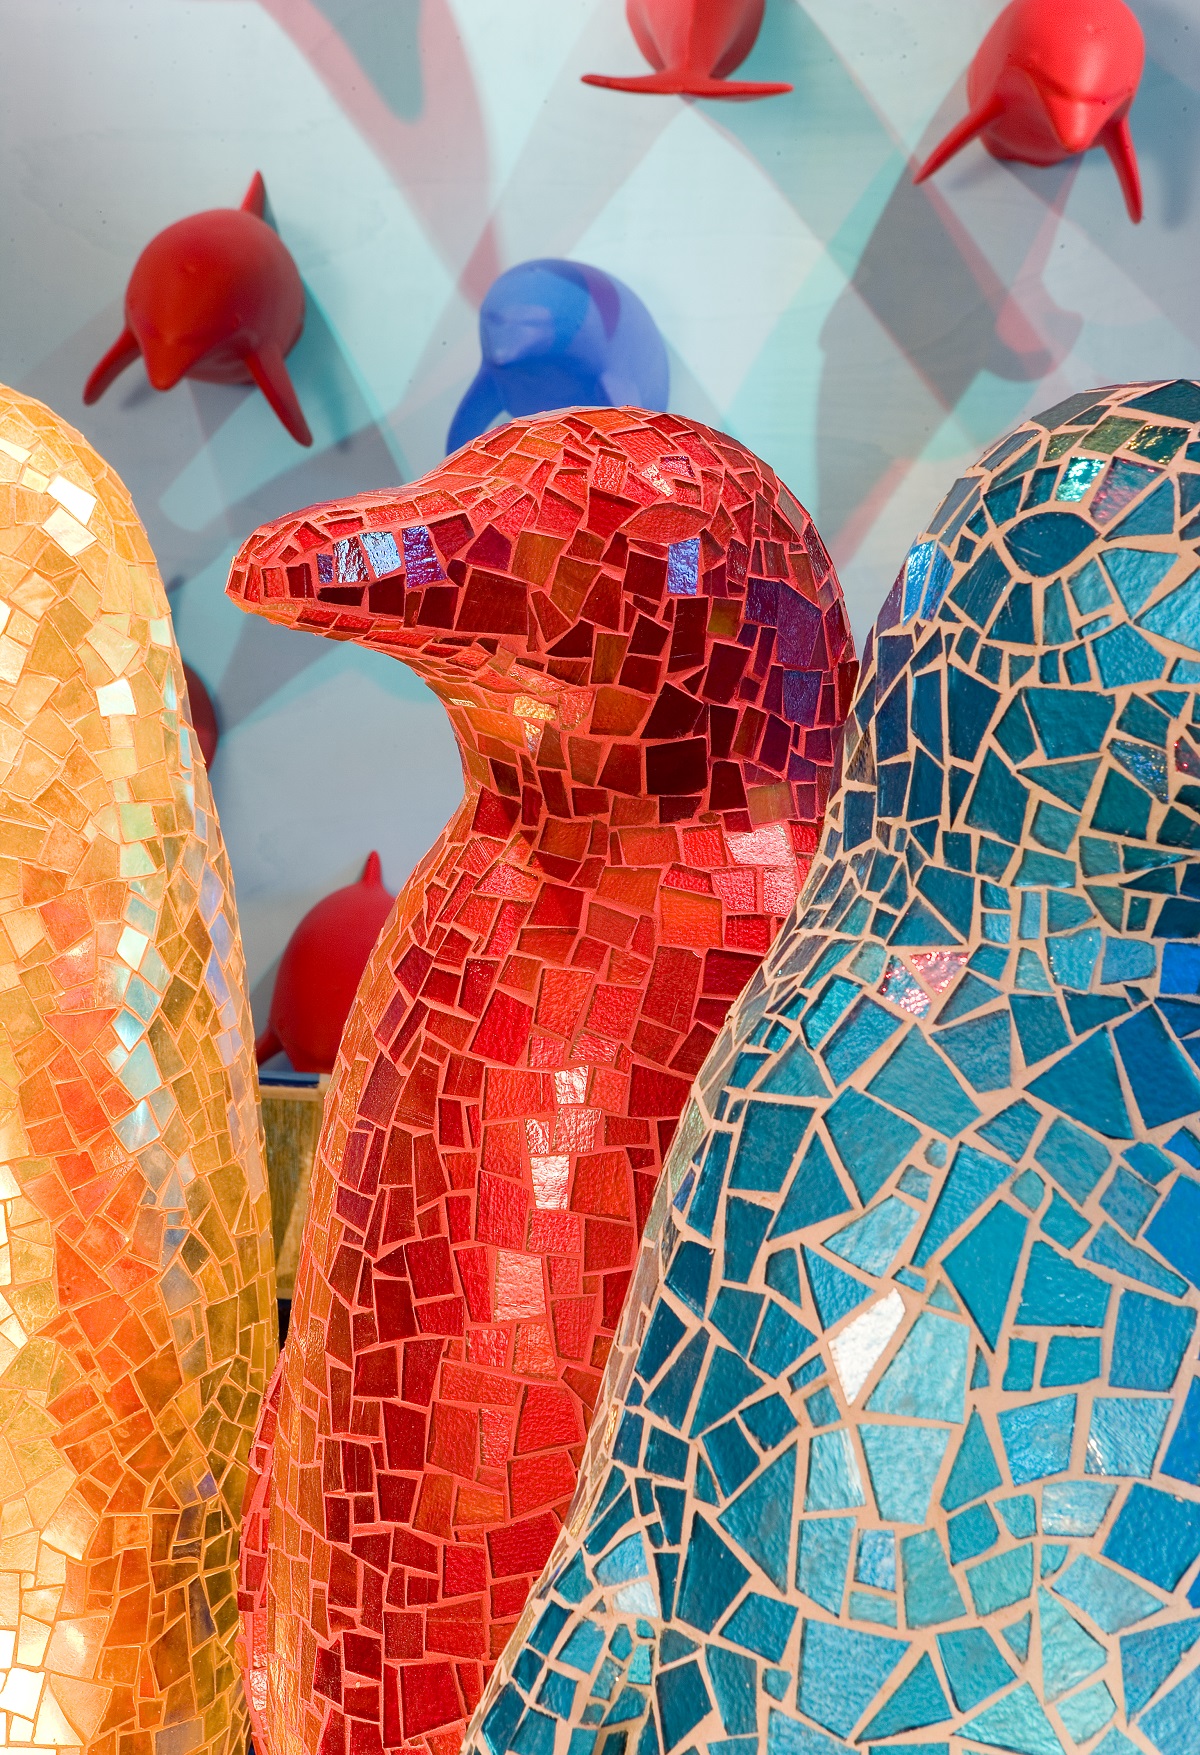 glass mosaic penguins by Cracking Art